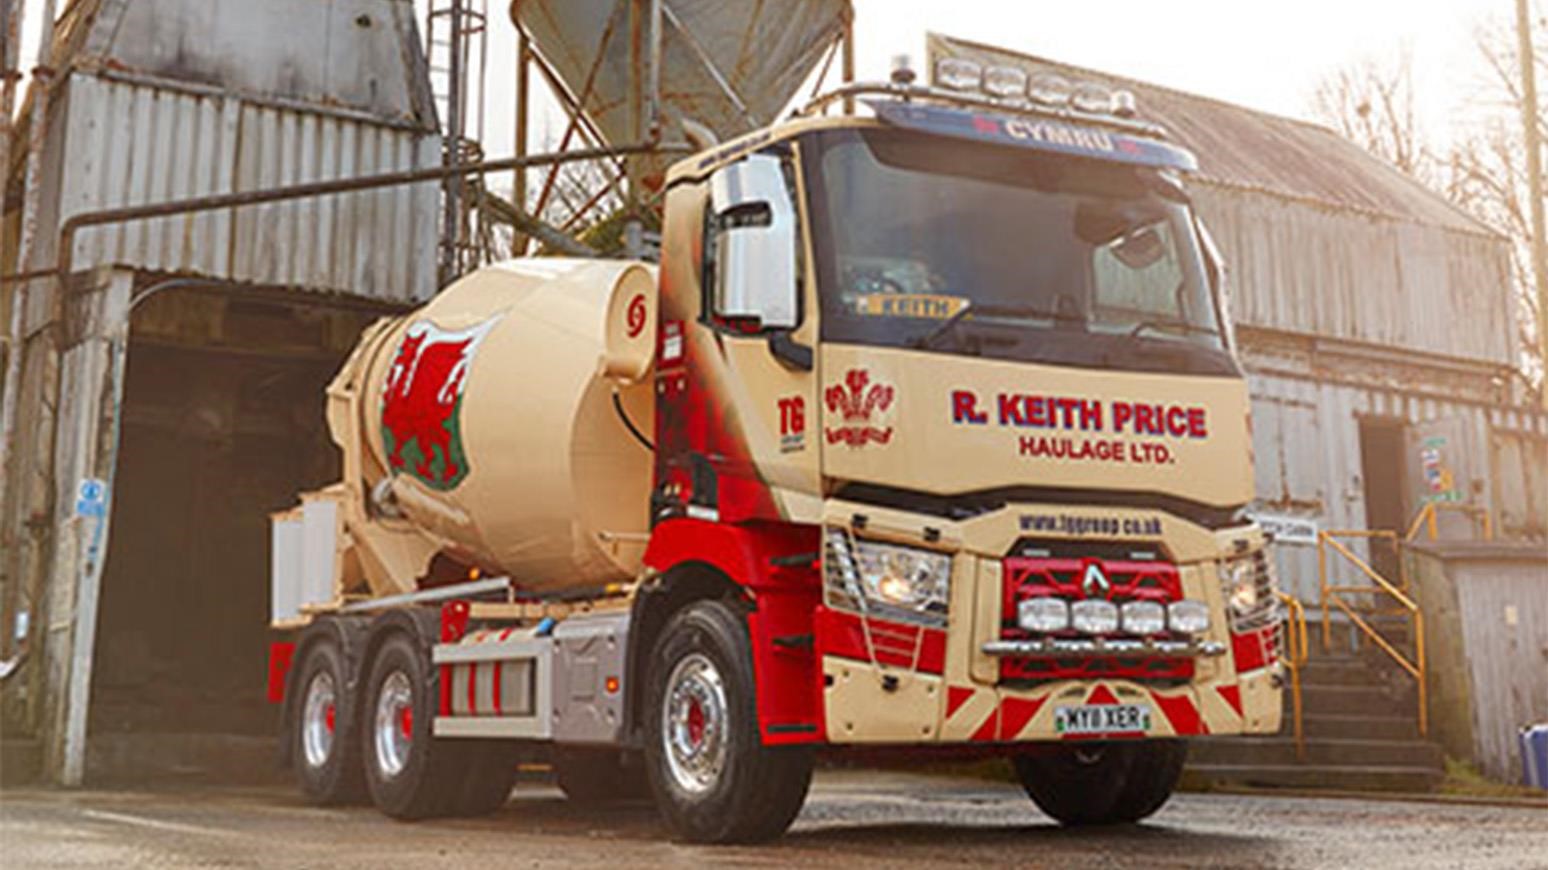 R. Keith Price Haulage Ltd Makes The Switch To Renault Trucks